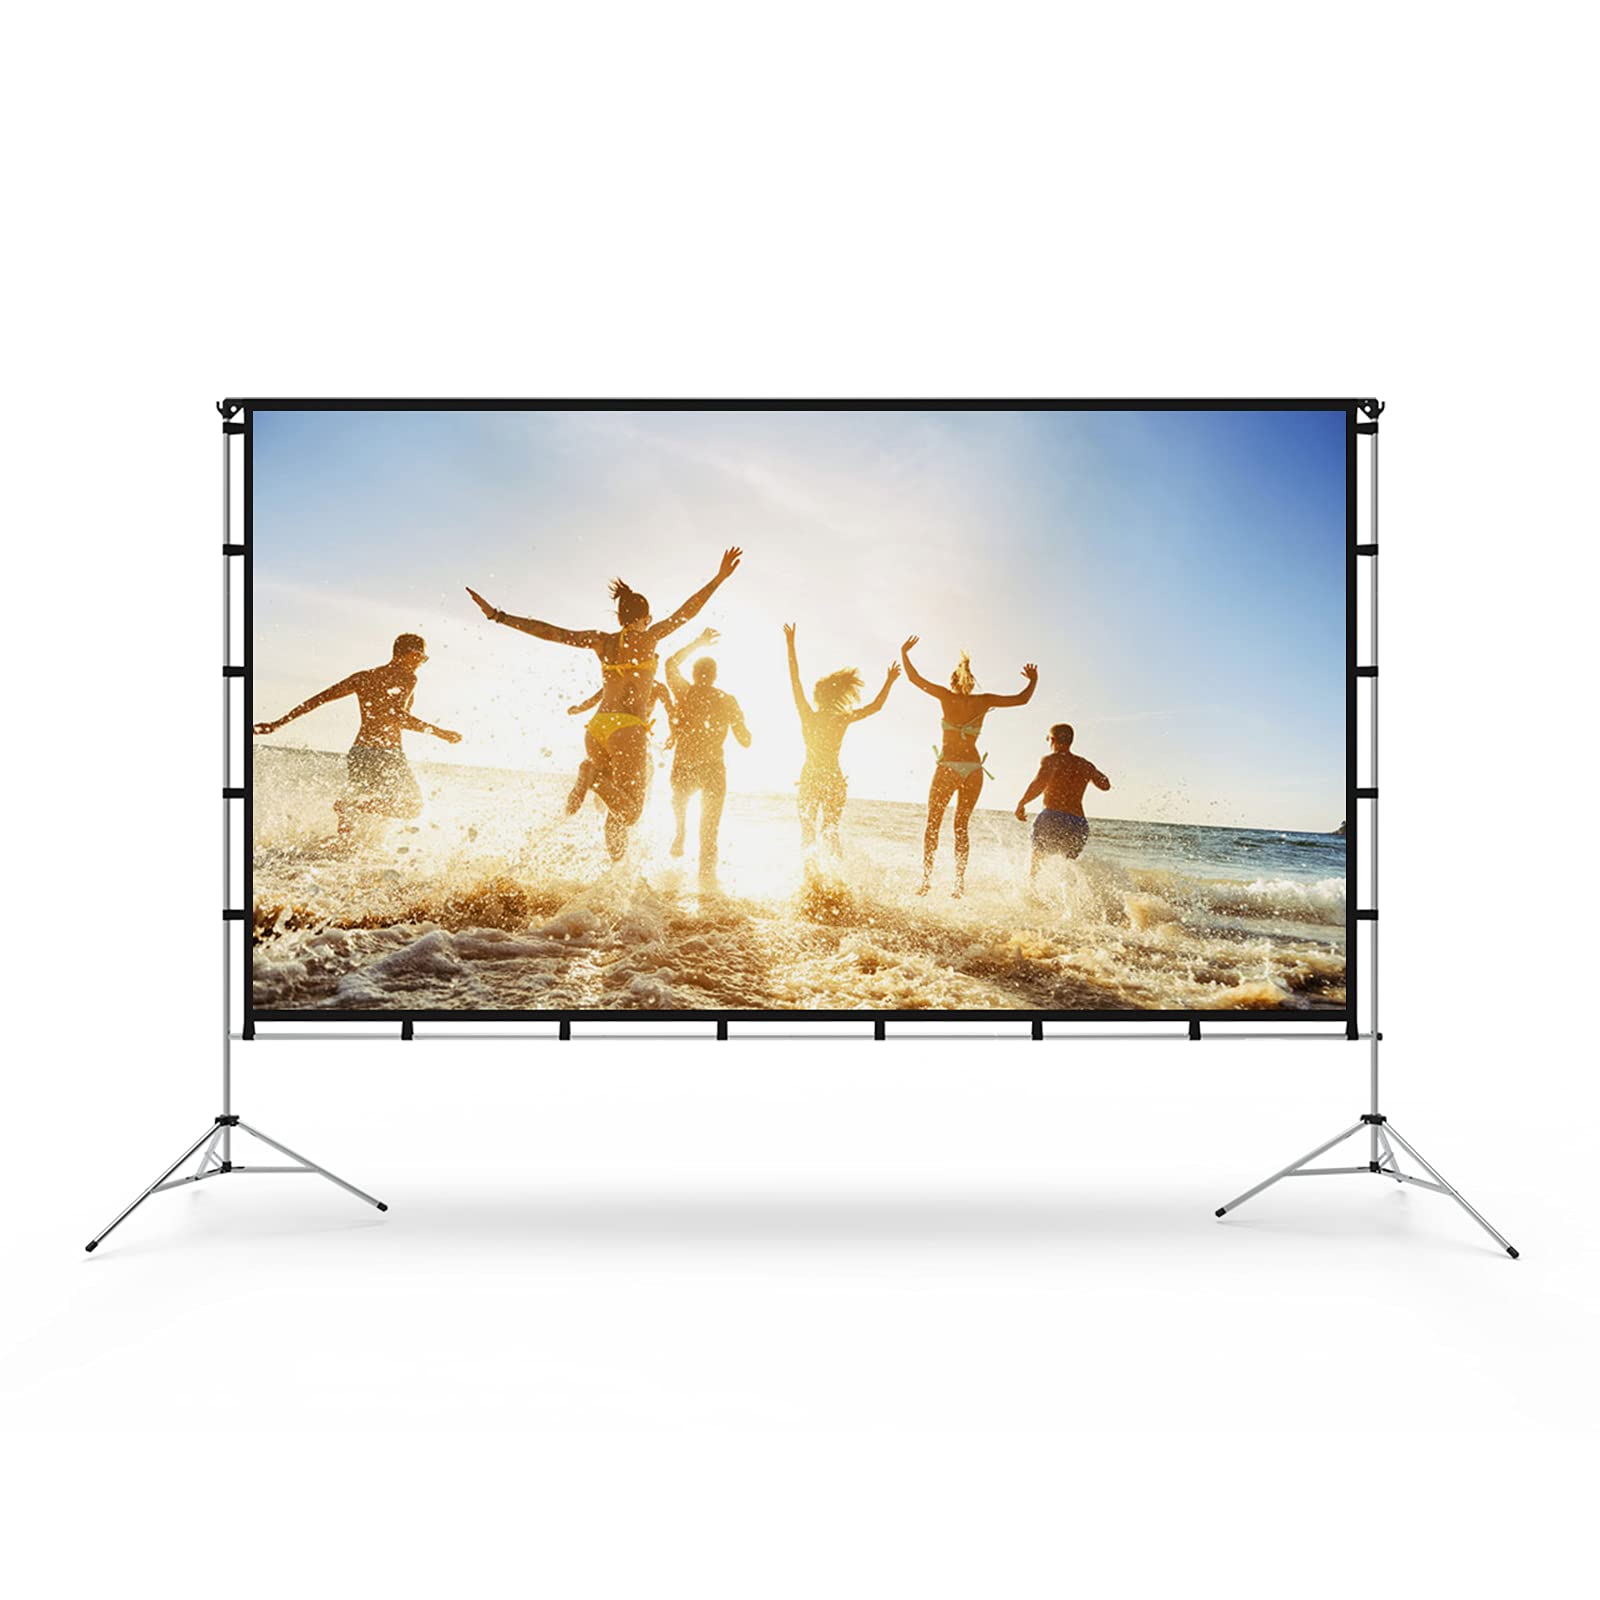 Projector Screen with Stand, Vamvo 100 inch Portable Foldable Projection Screen 16:9 HD 4K Indoor Outdoor Projector Movies Screen with Carrying Bag for Home Theater Camping and Recreational Events